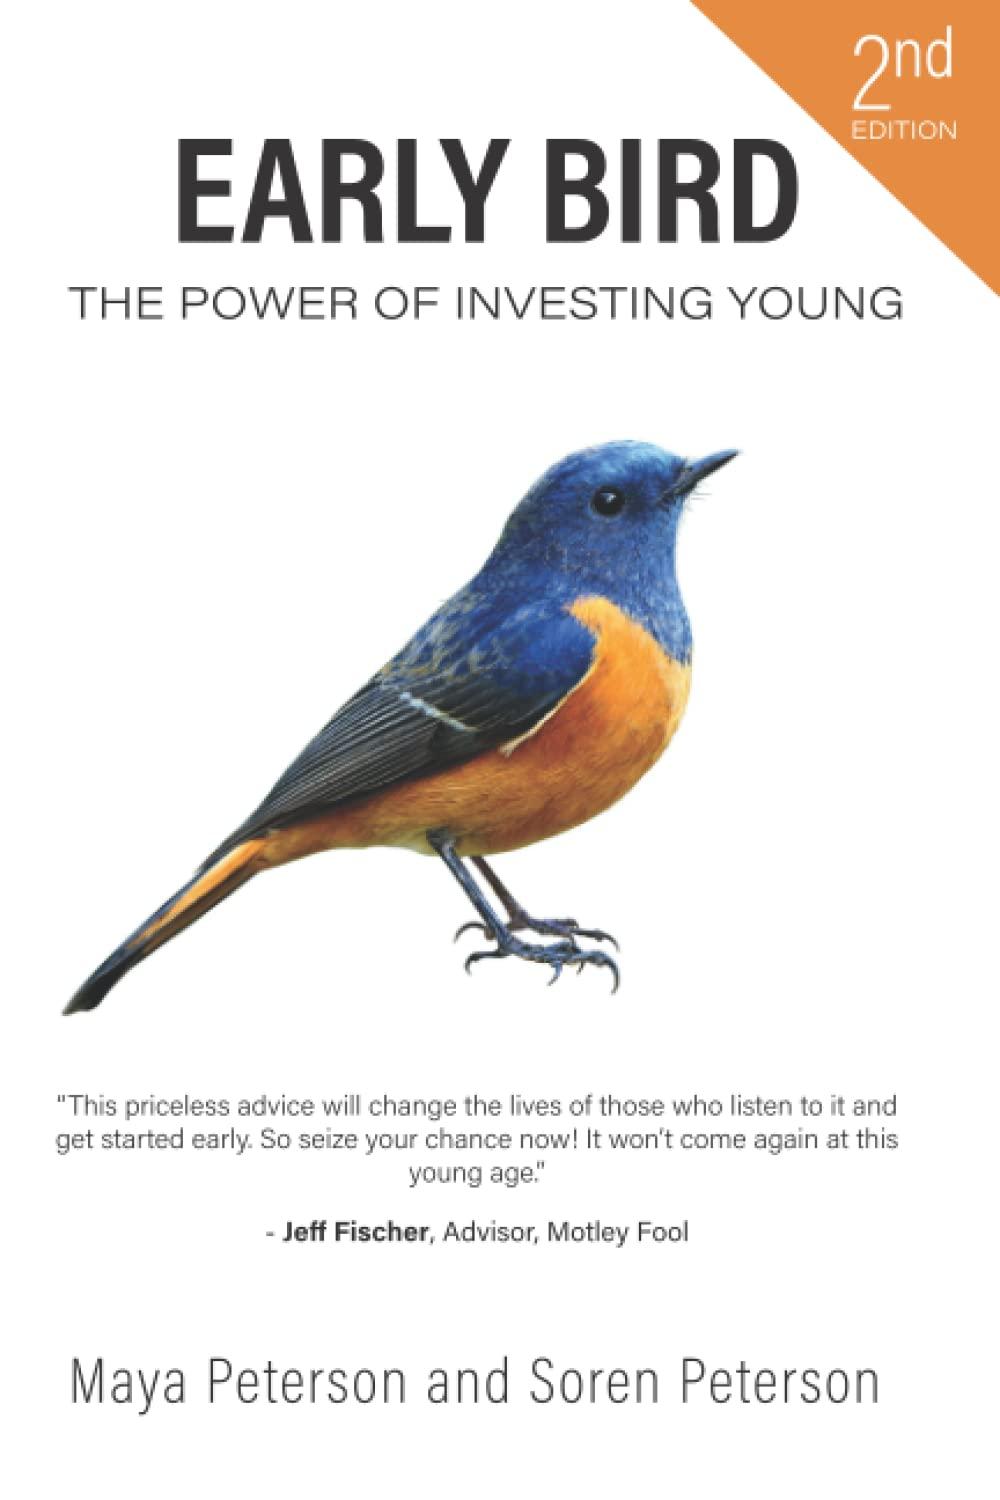 early bird the power of investing young 2nd edition maya peterson ,soren peterson 1973235439, 978-1973235439